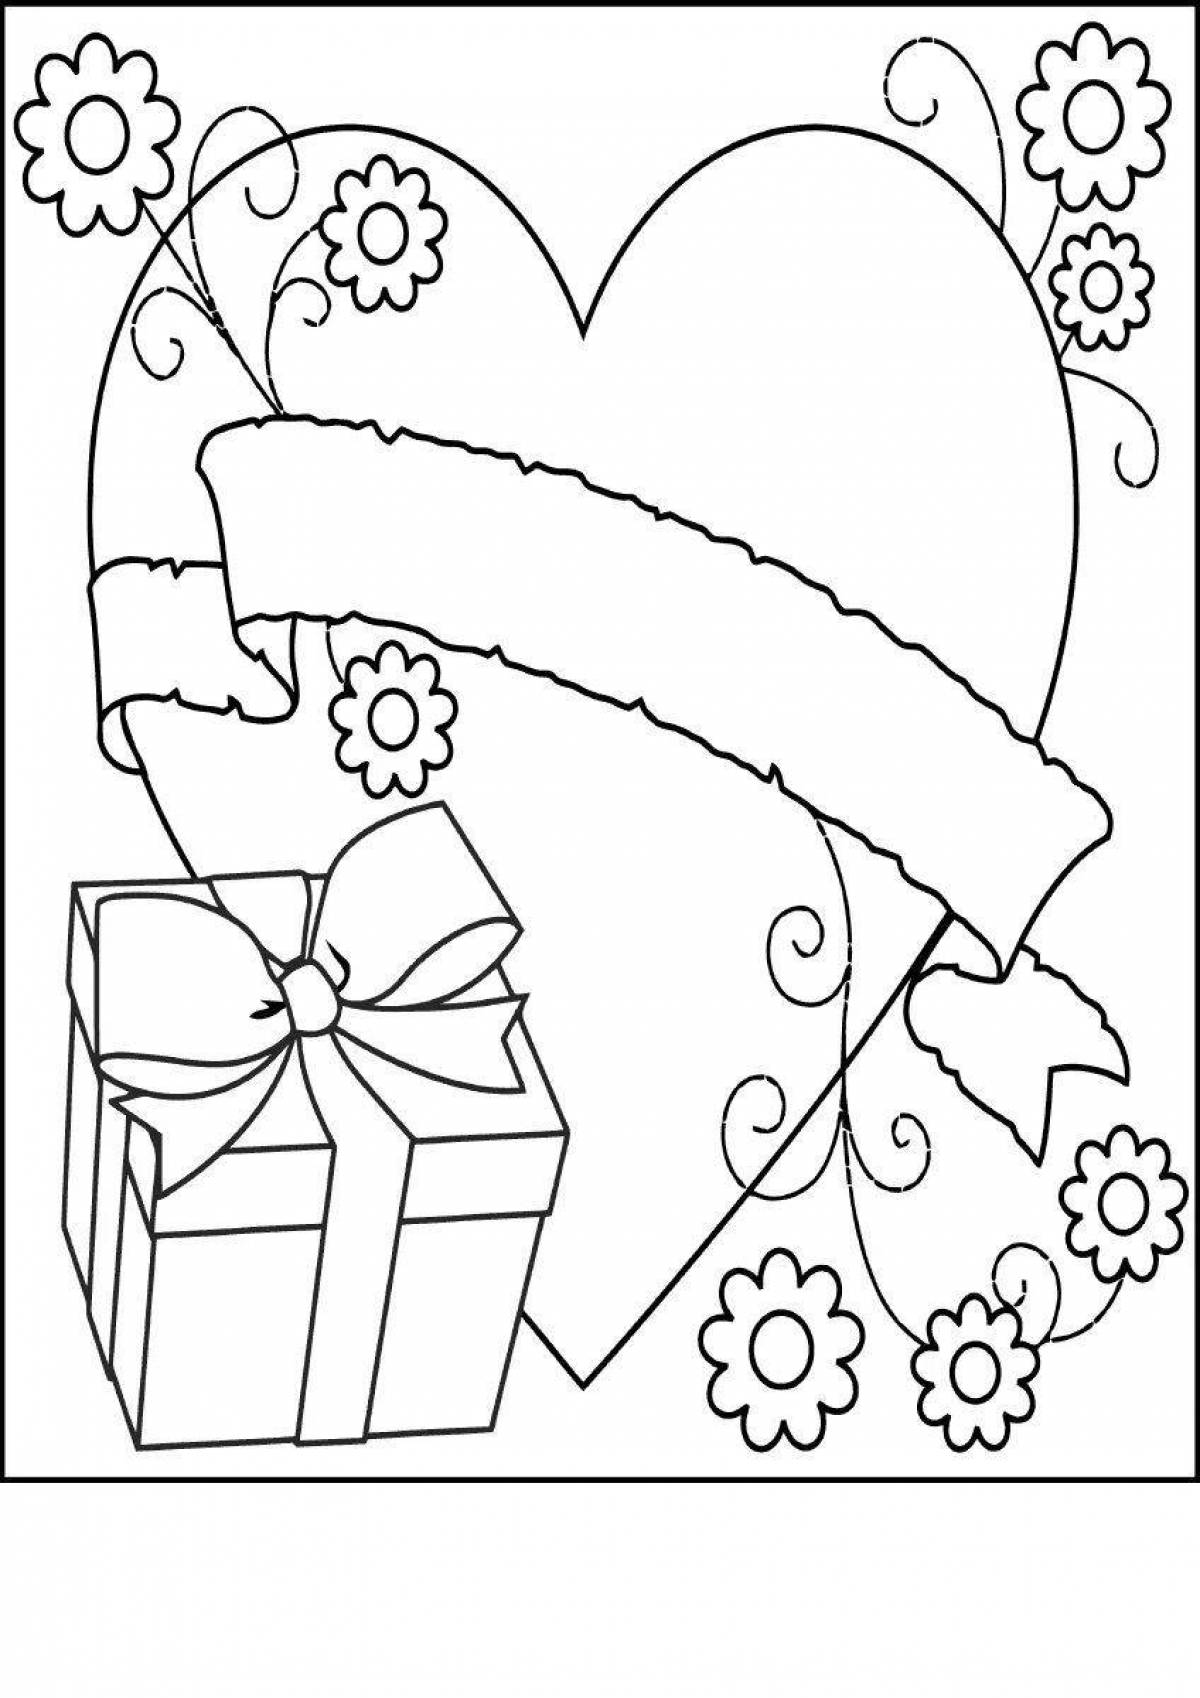 Mom's dazzling coloring book for the new year